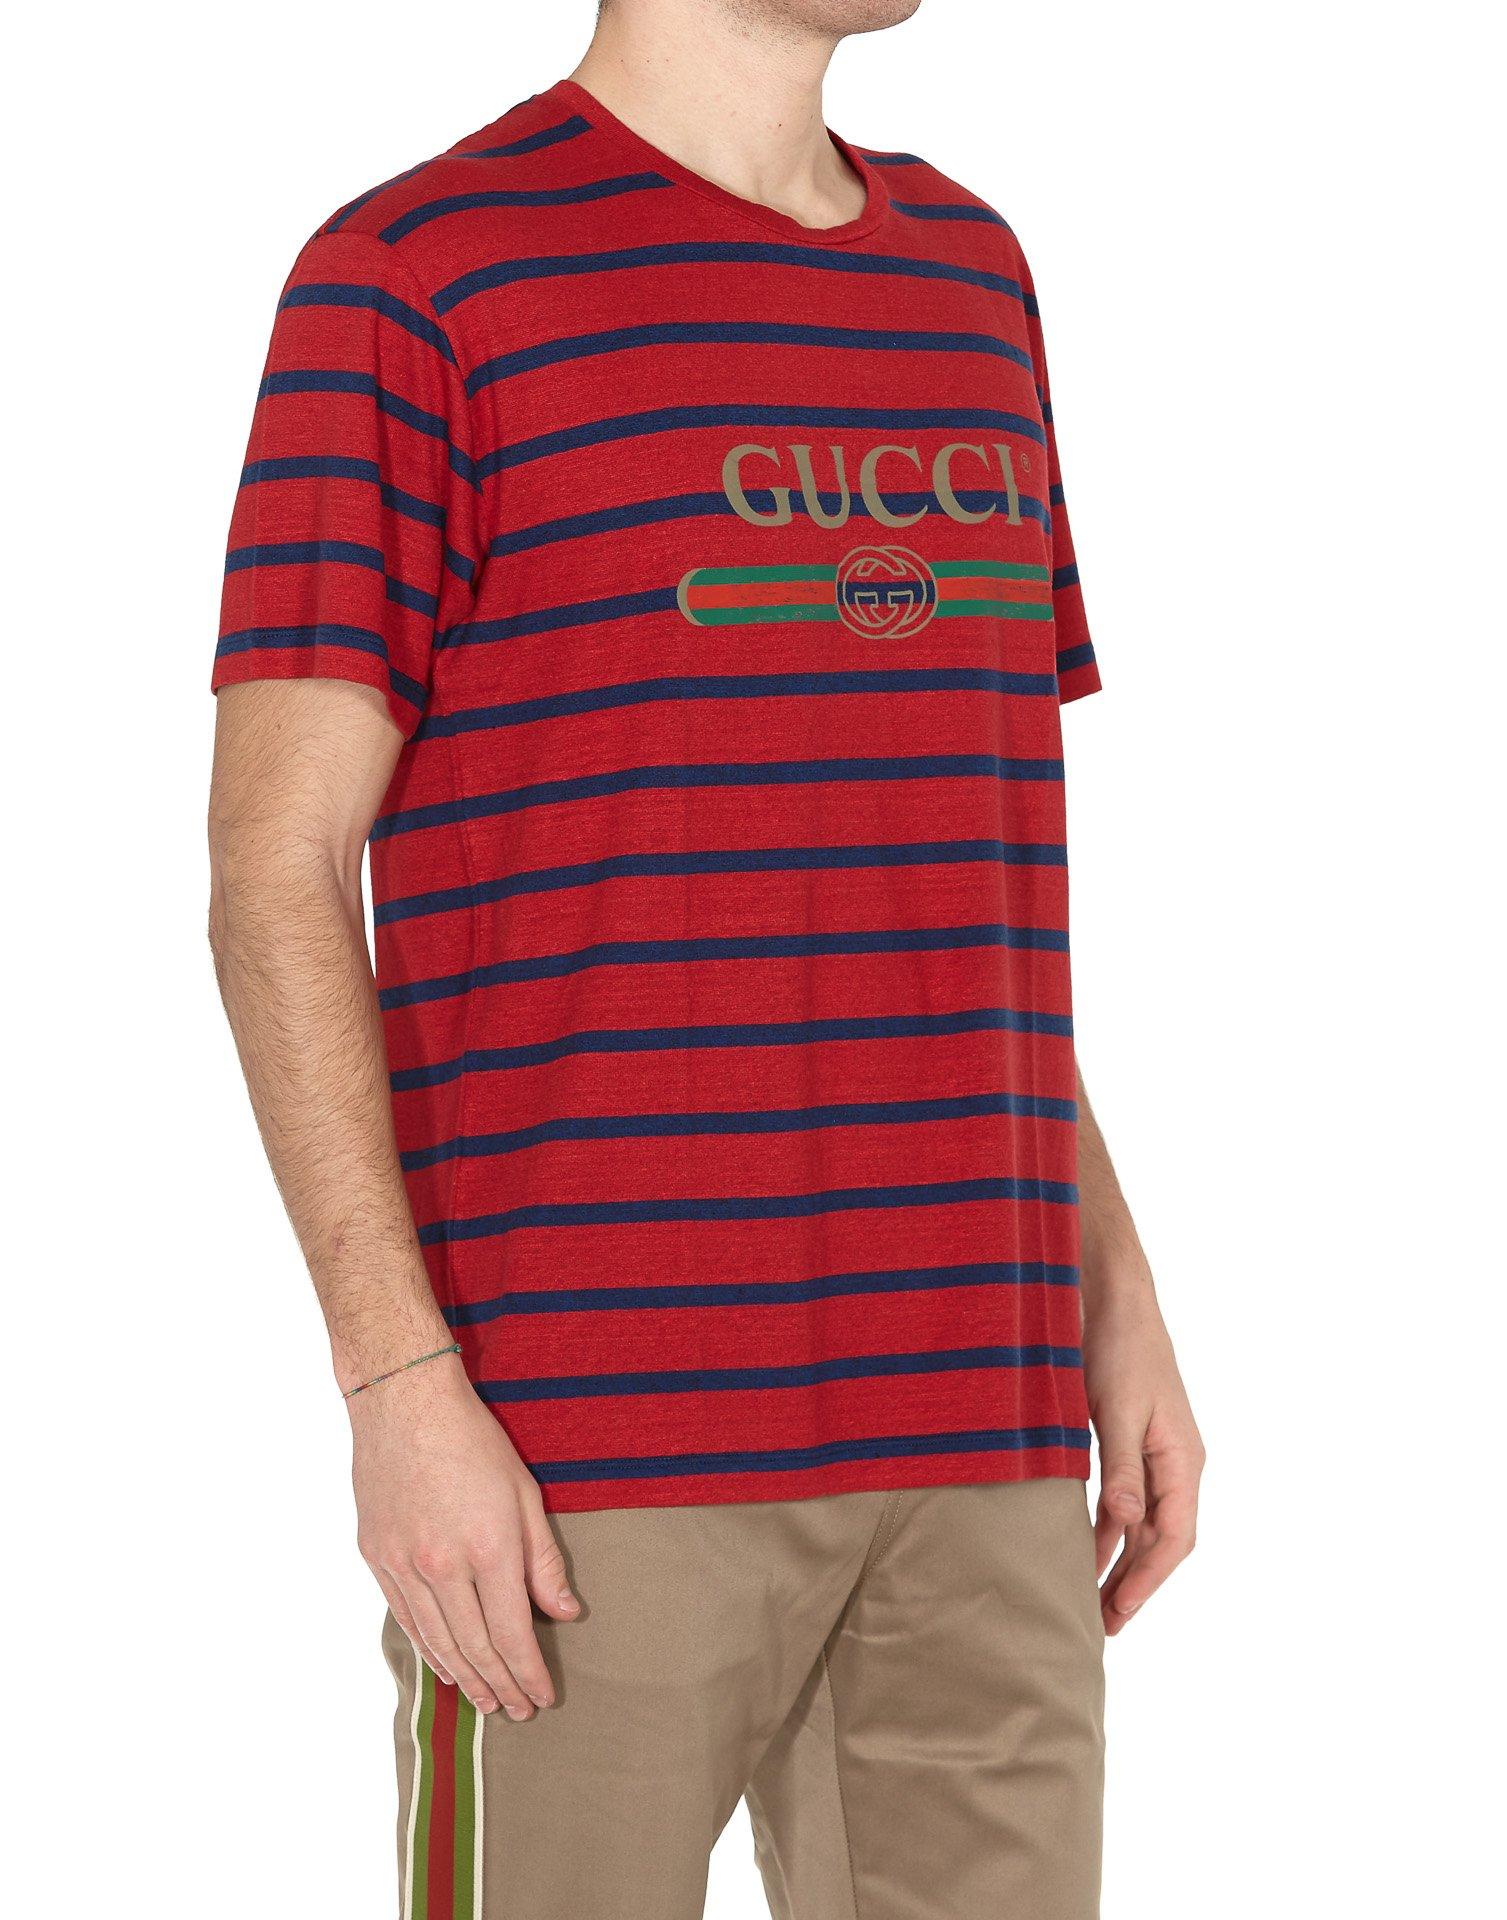 Gucci Cotton Logo Stripe T-shirt in Red for Men - Lyst